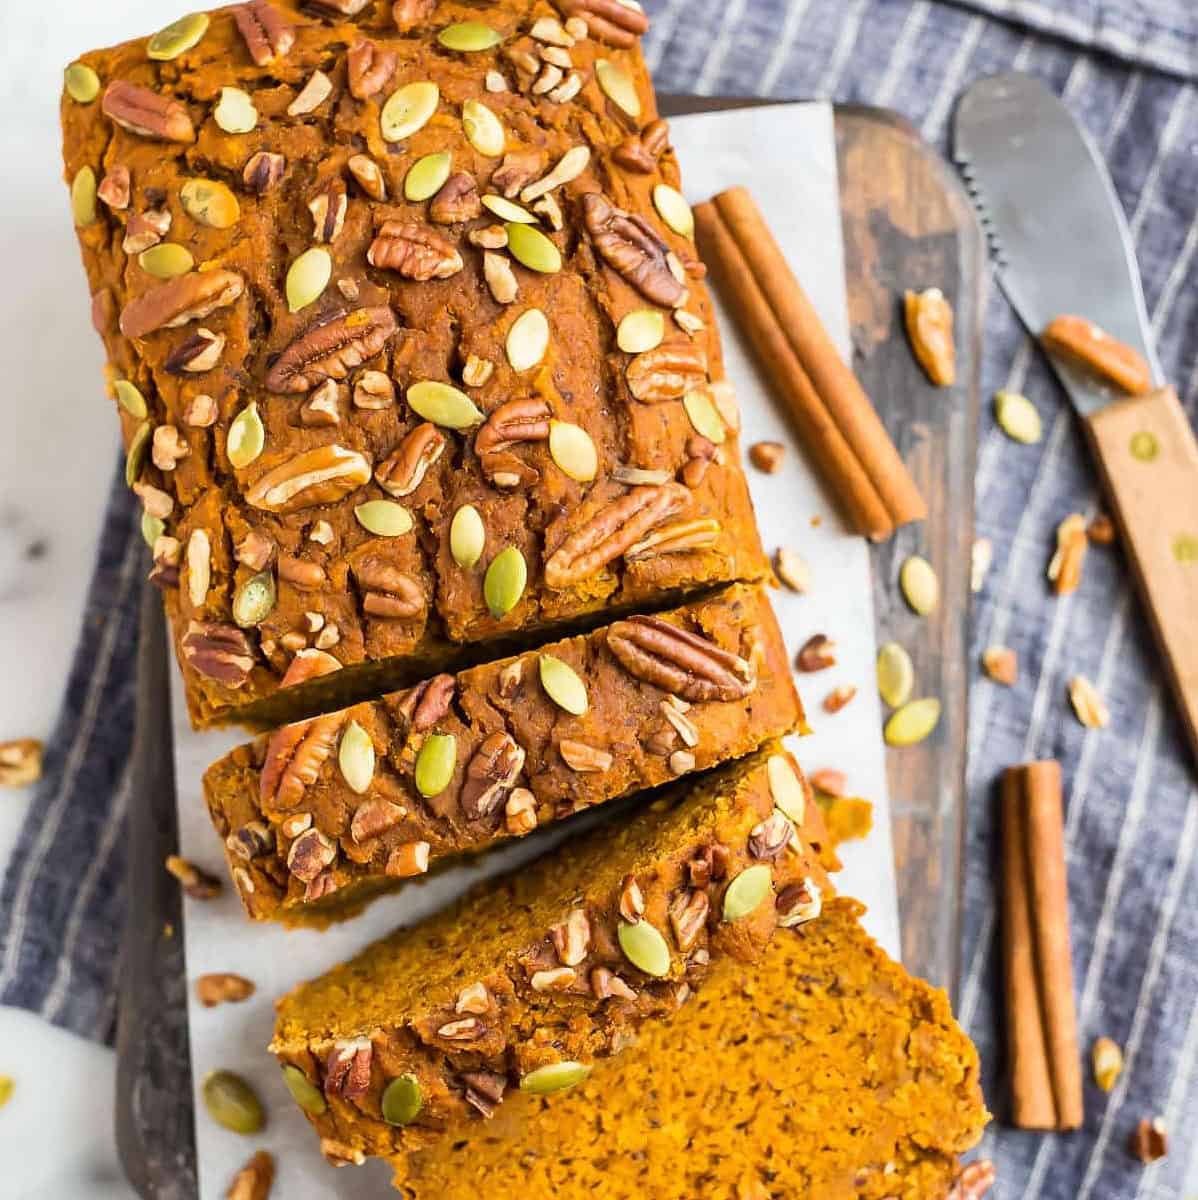  Satisfy your pumpkin cravings with this delicious vegan bread